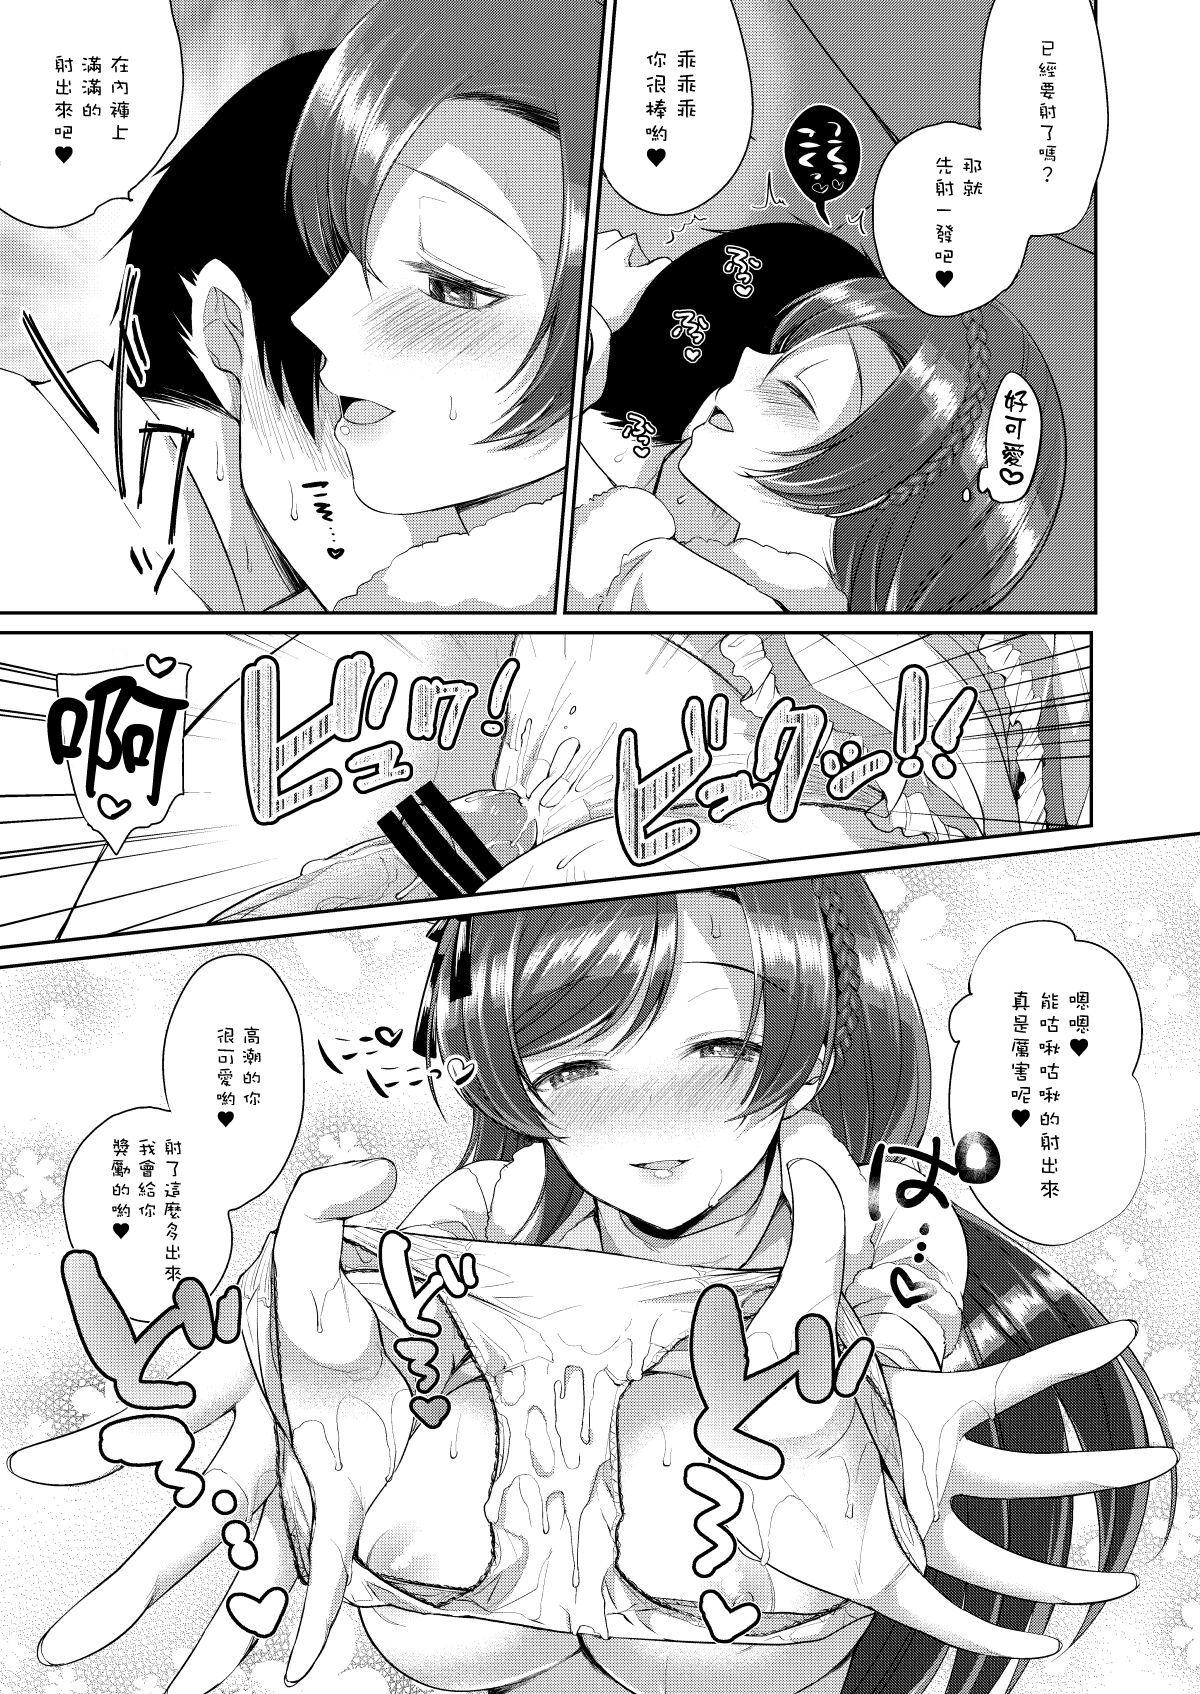 Gay Brokenboys 希といちゃラブエッチ - Love live Cums - Page 5